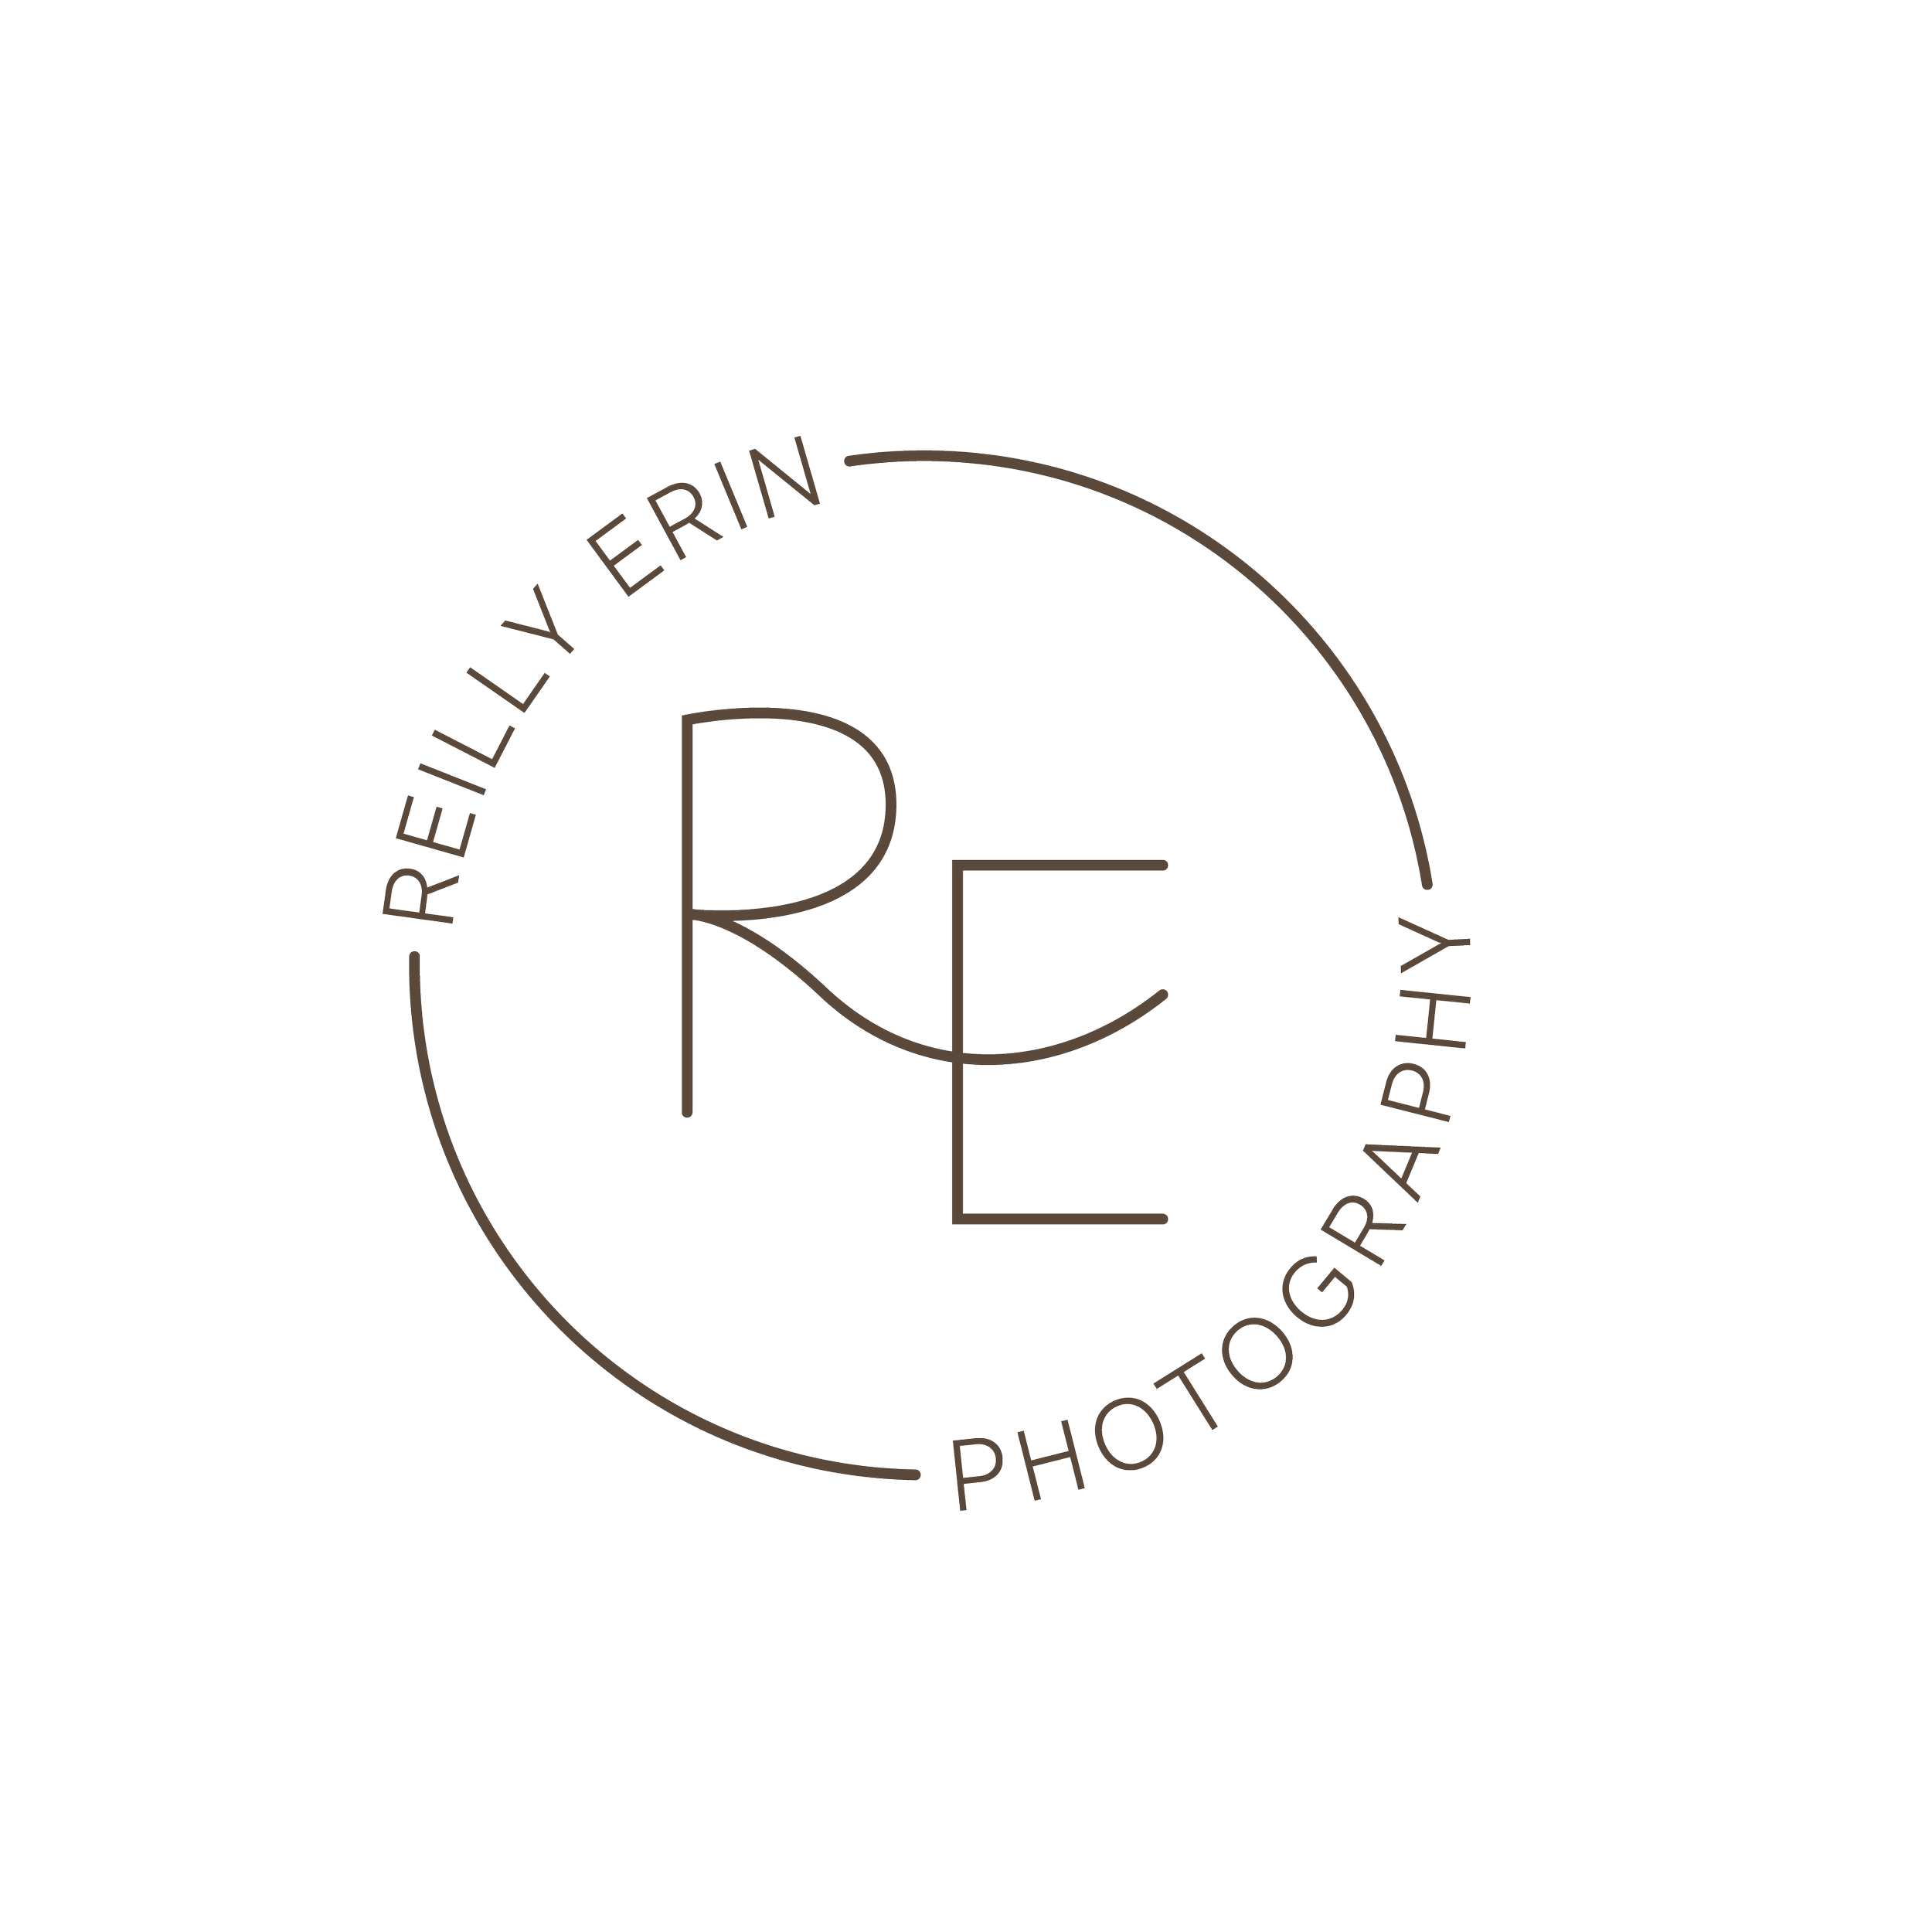 Reilly Erin Photo Logo.png